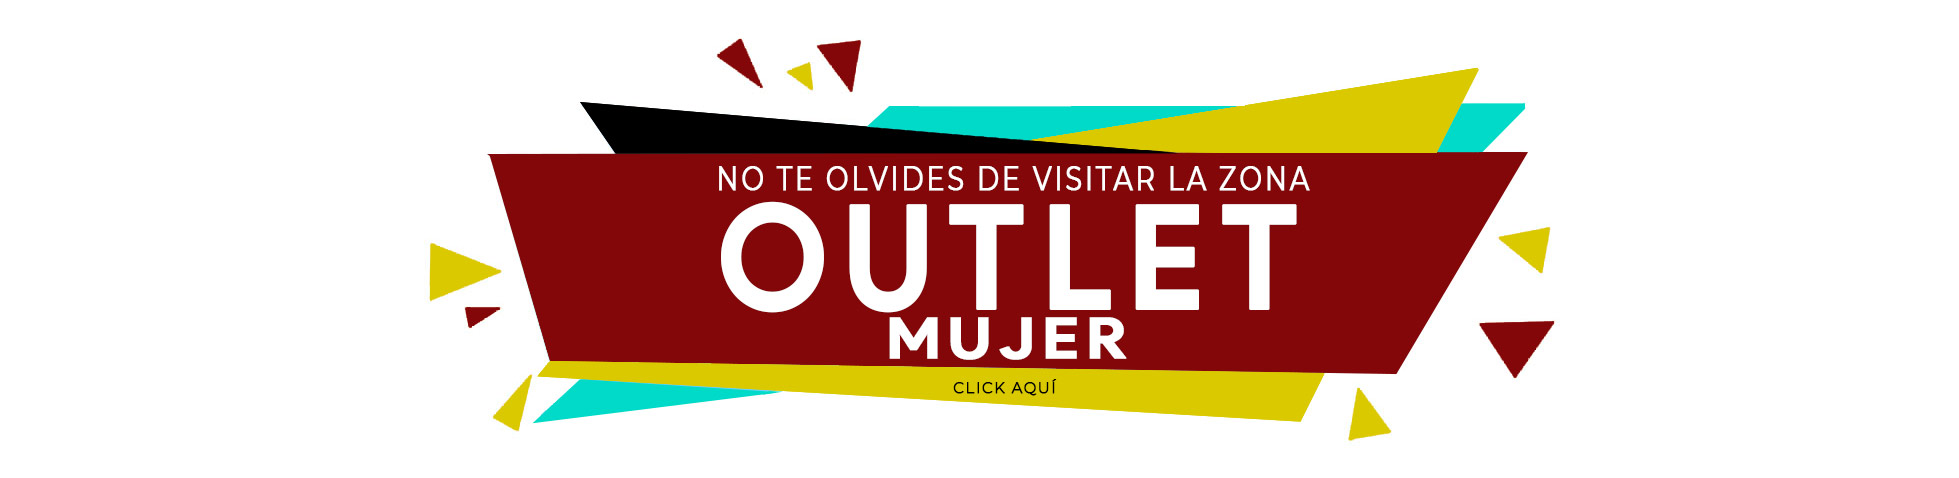 Zona Outlet Mujer